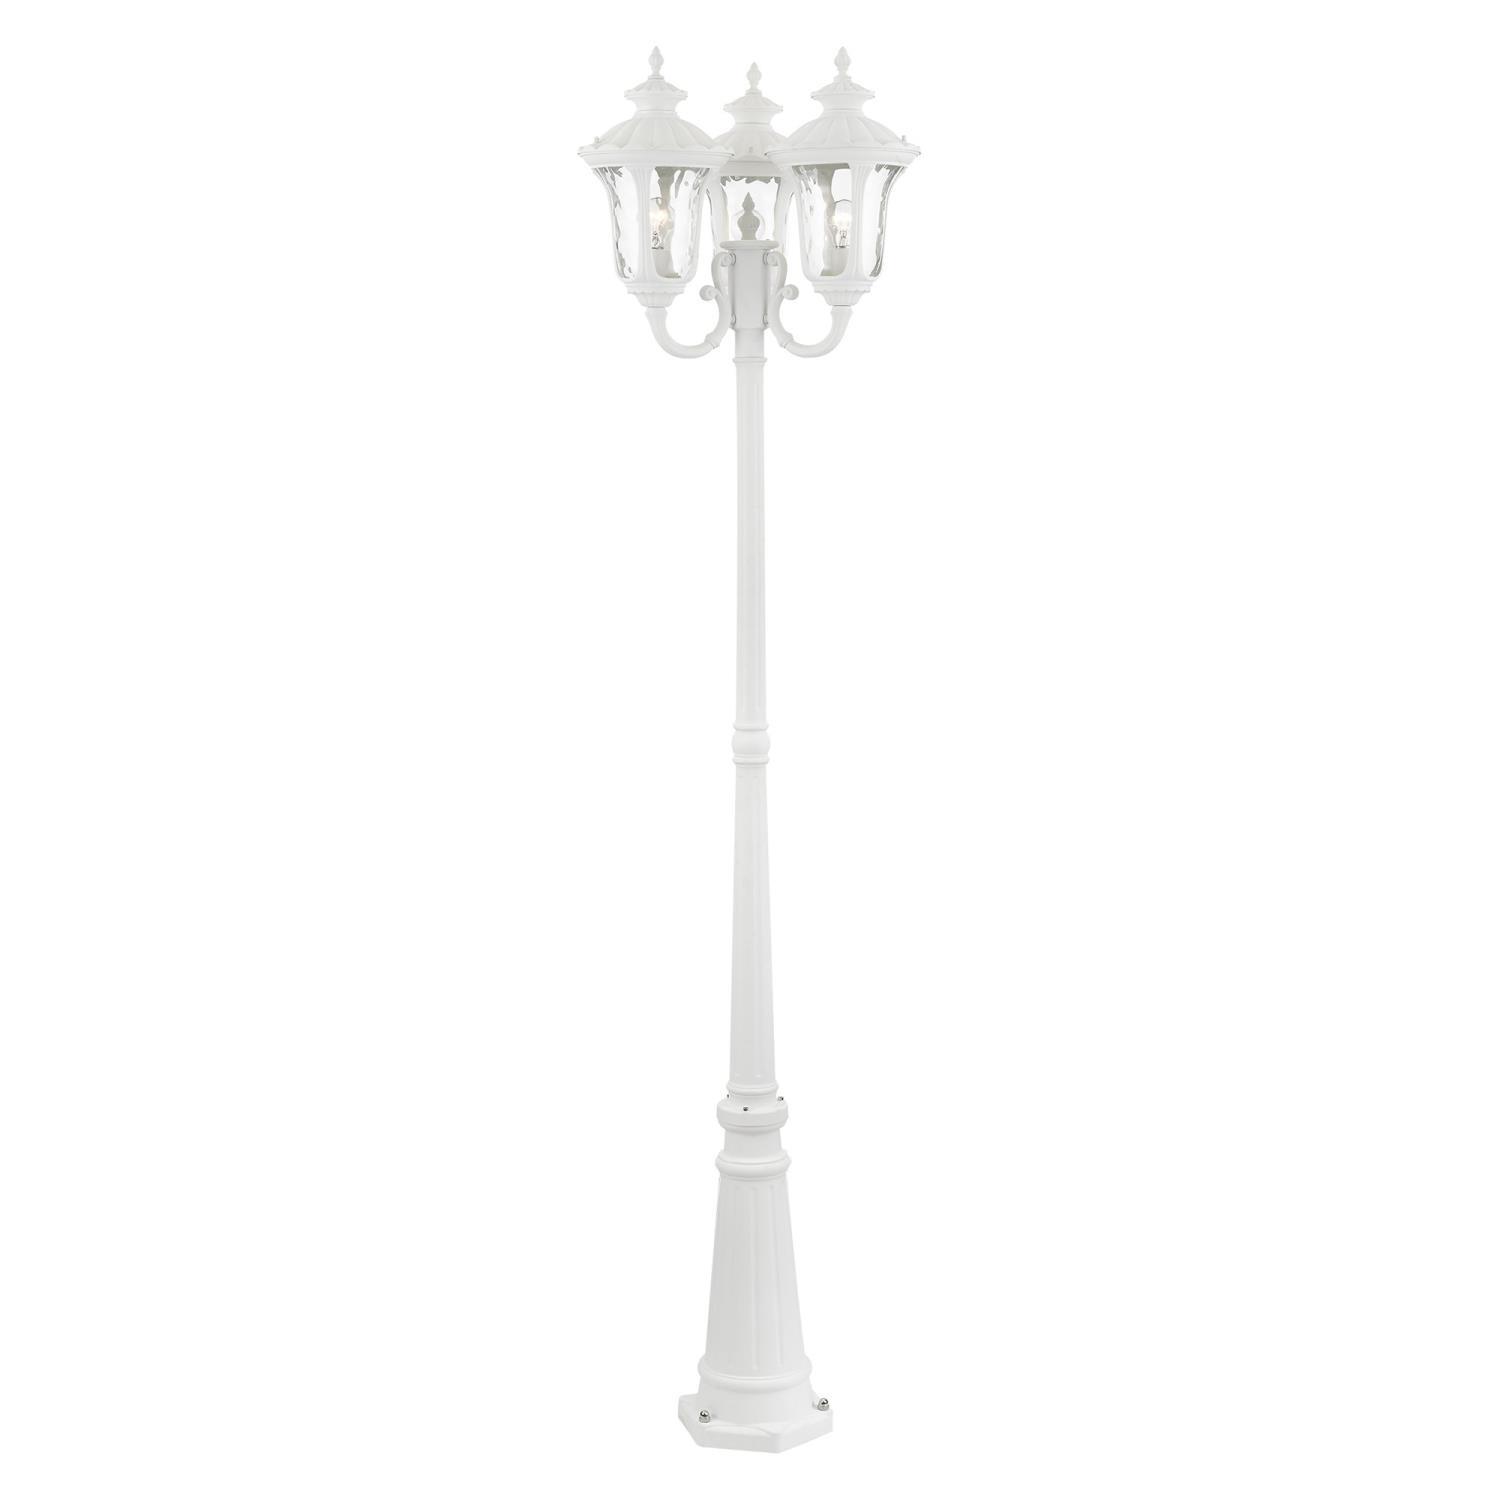 Livex Lighting 3 Light Outdoor Post Light With Textured White Finish 7866-13 - image 1 of 7